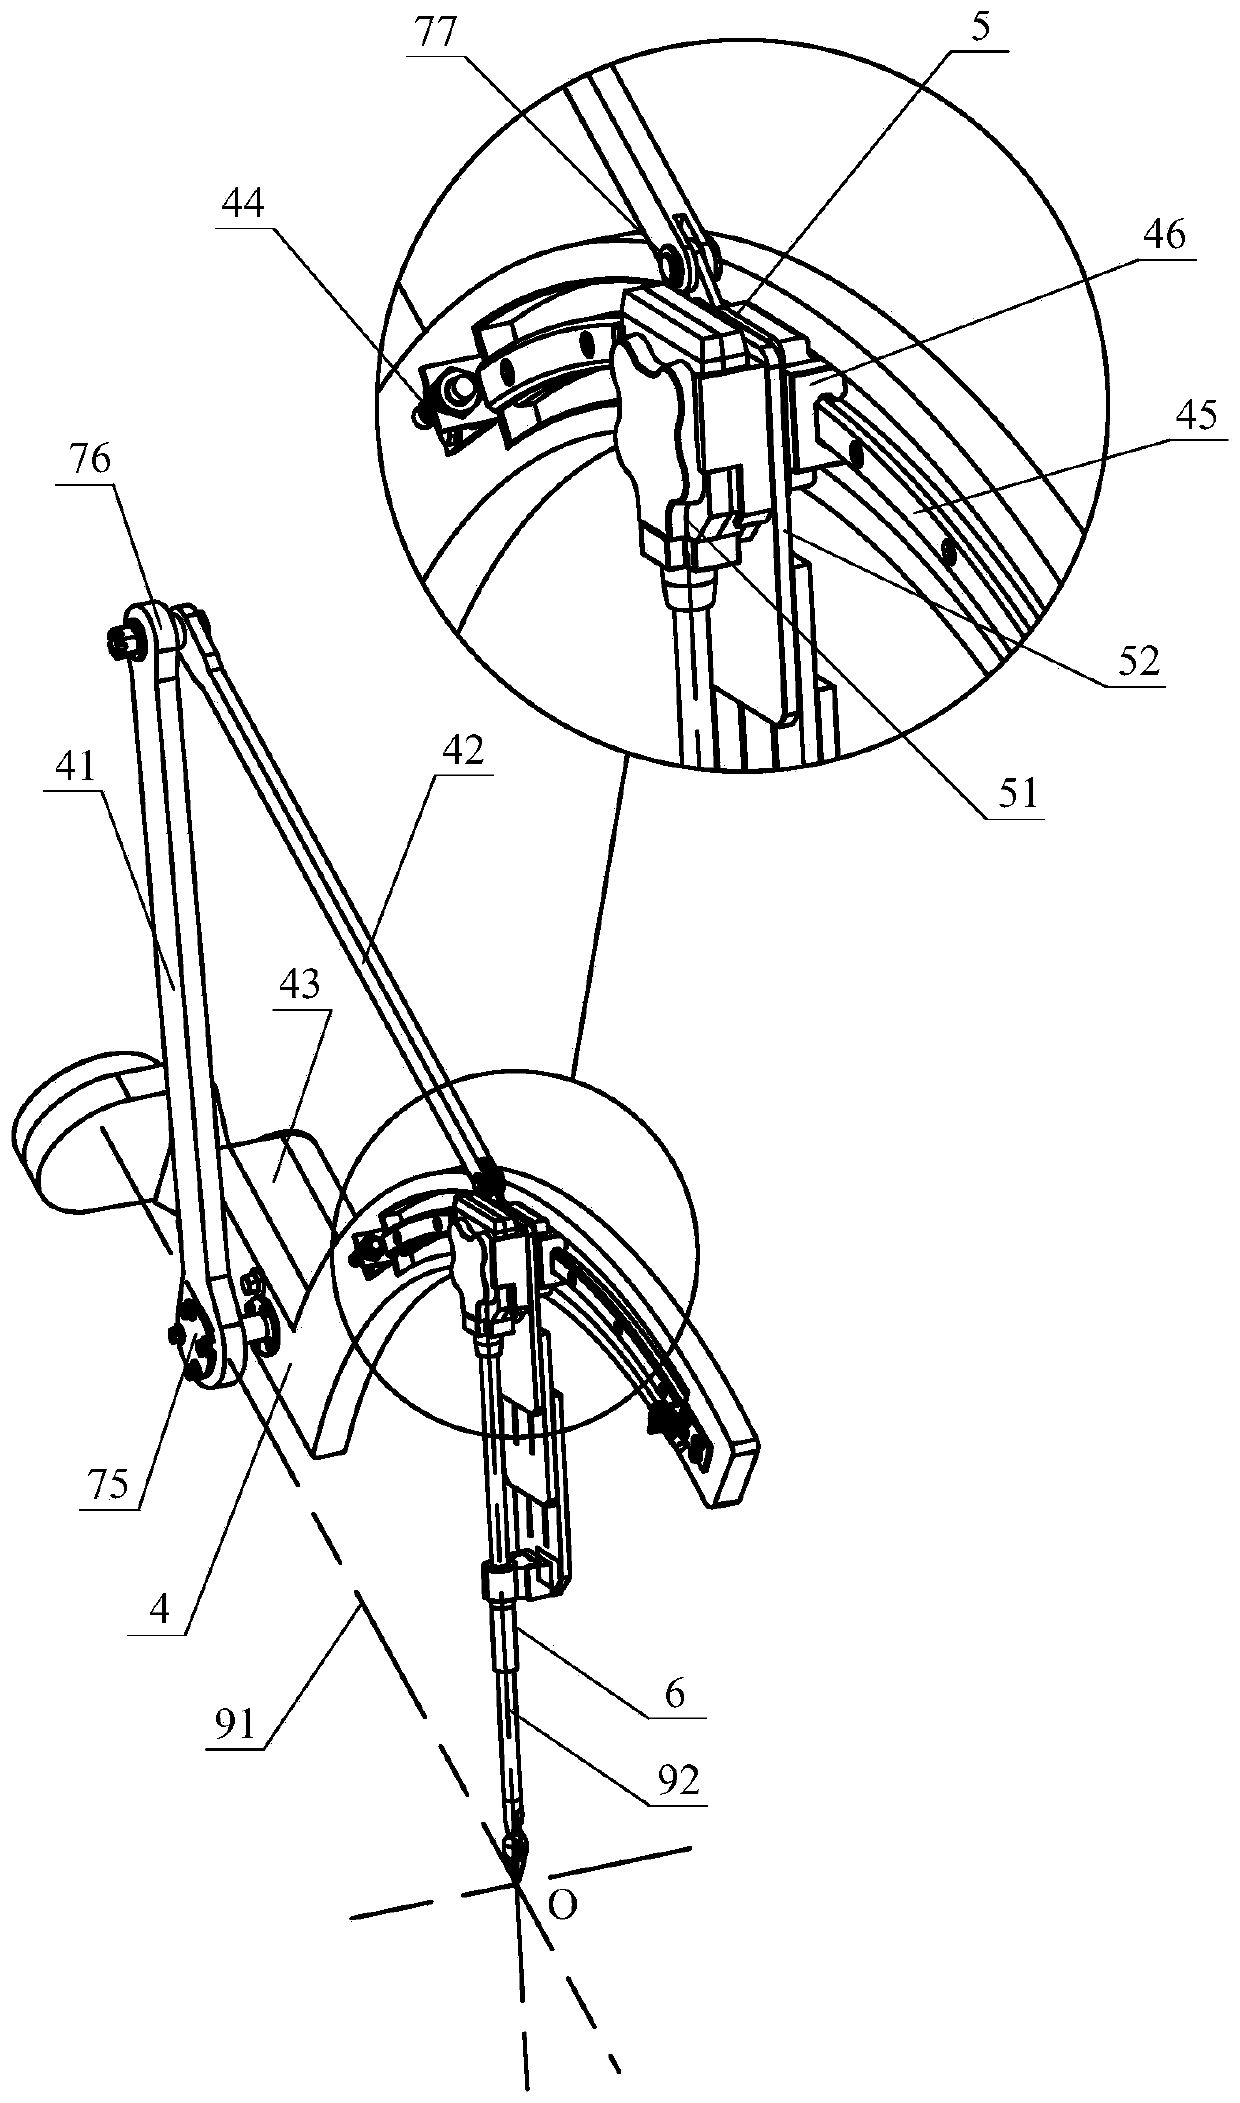 Eight-degree-of-freedom surgery mechanical arm comprising closed-loop connecting rod